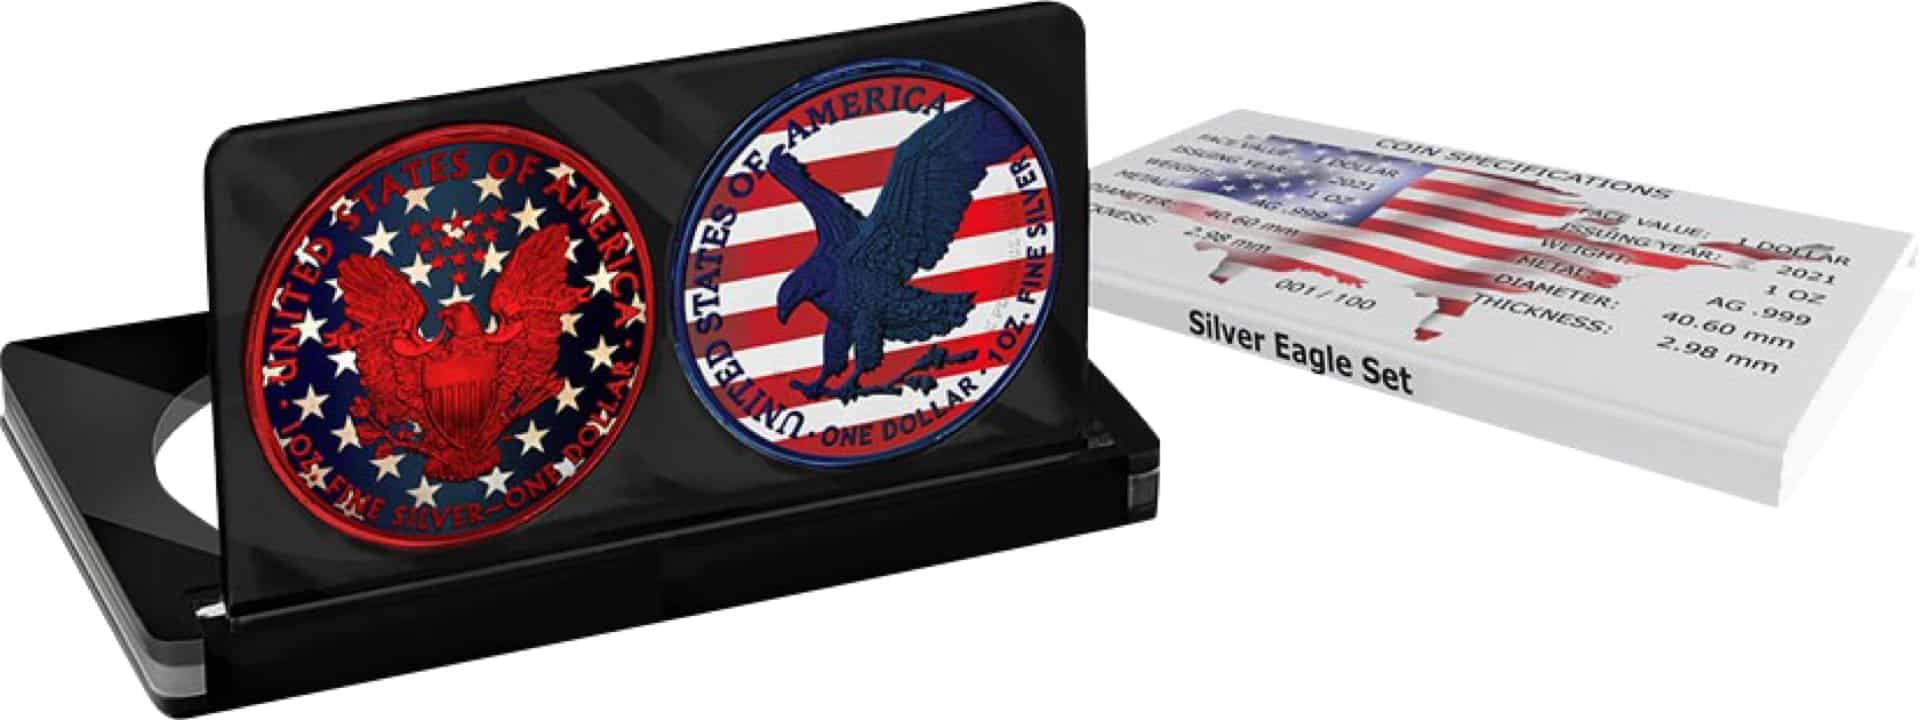 2 x 1 Unze Silber American Eagle Stars and Stripes Set 2021 (Auflage: 100 | Coloriert)